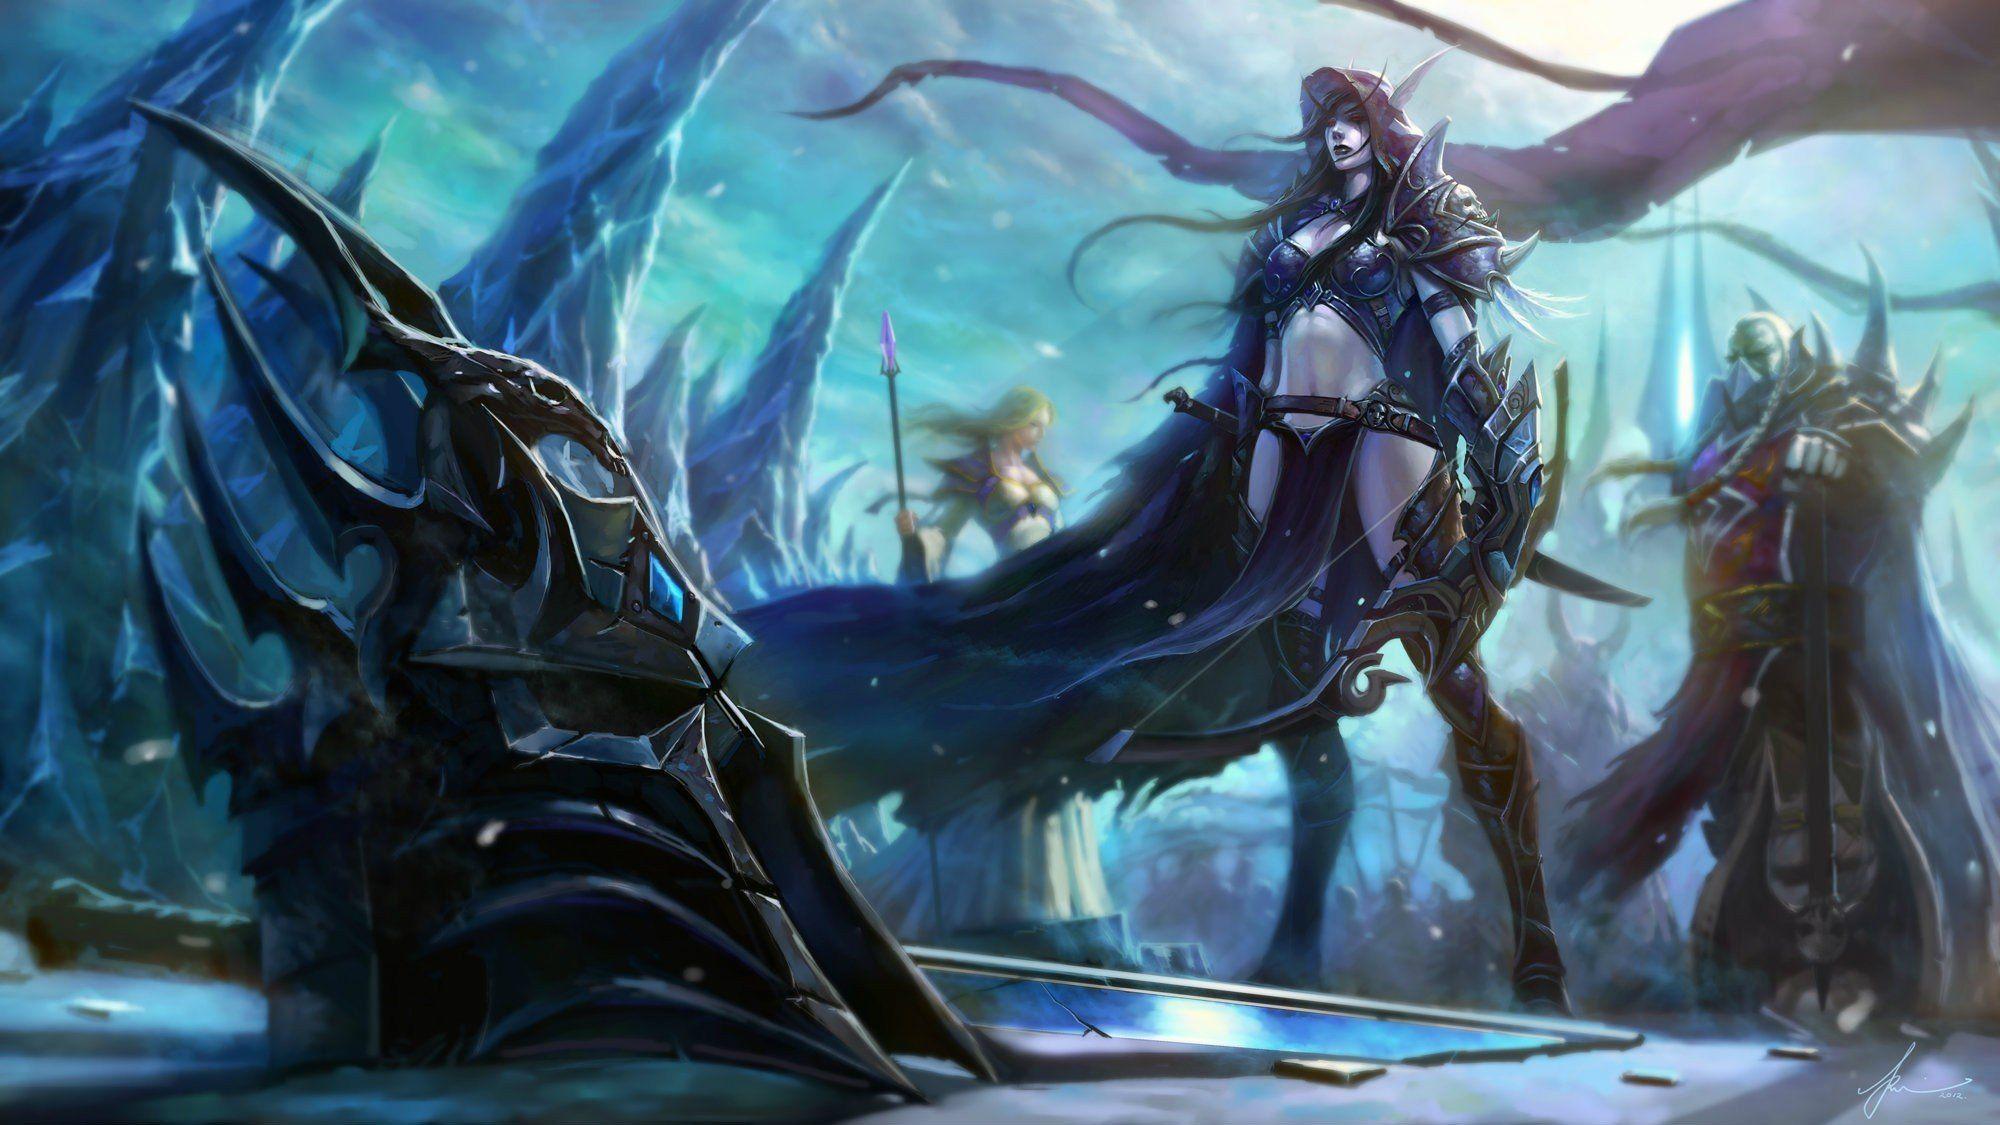 Awesome Lich King wallpaper, wondering who made it. Anyone recognize